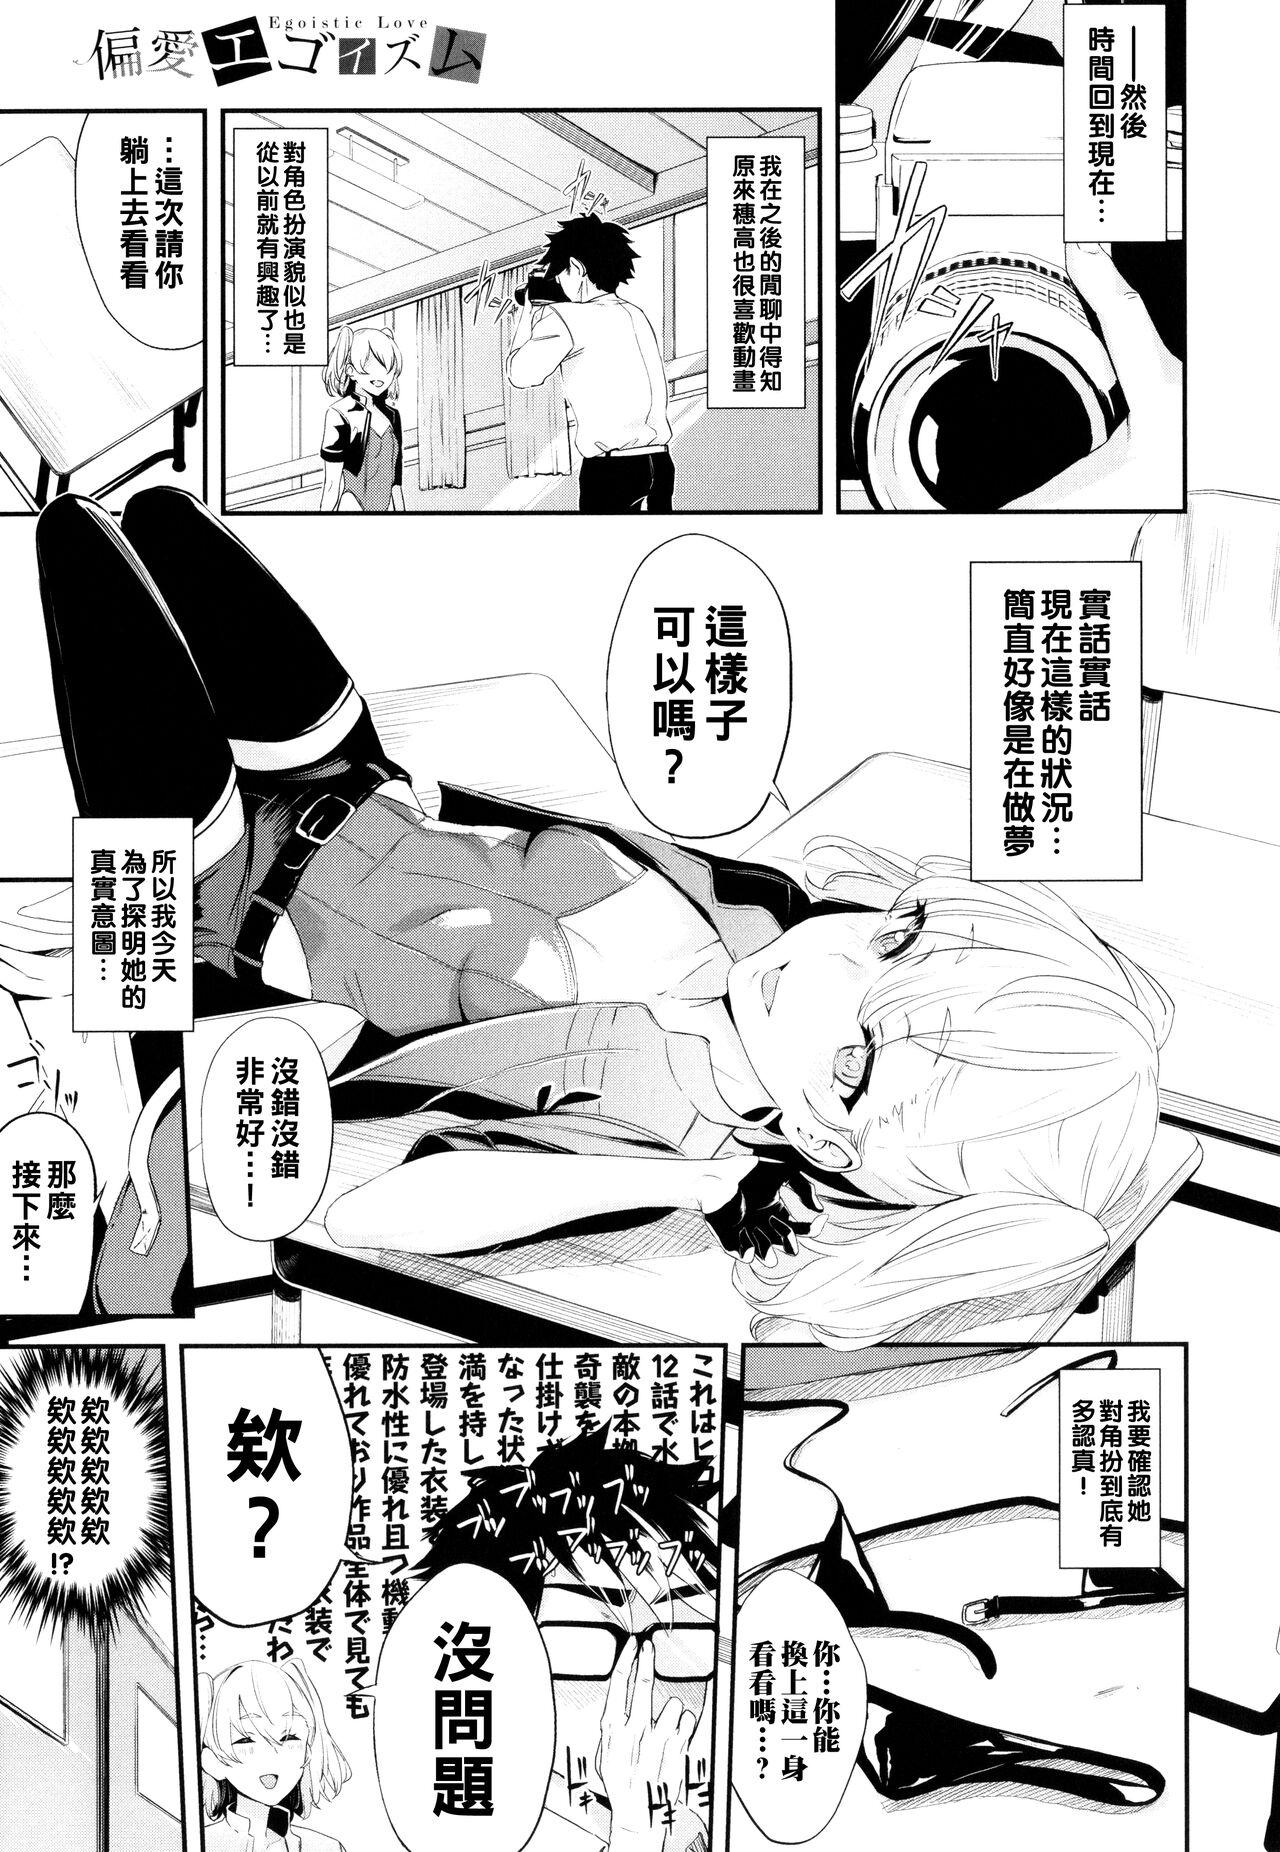 Barely 18 Porn コスプレイヤーのあのコ（Chinese） Blows - Page 3